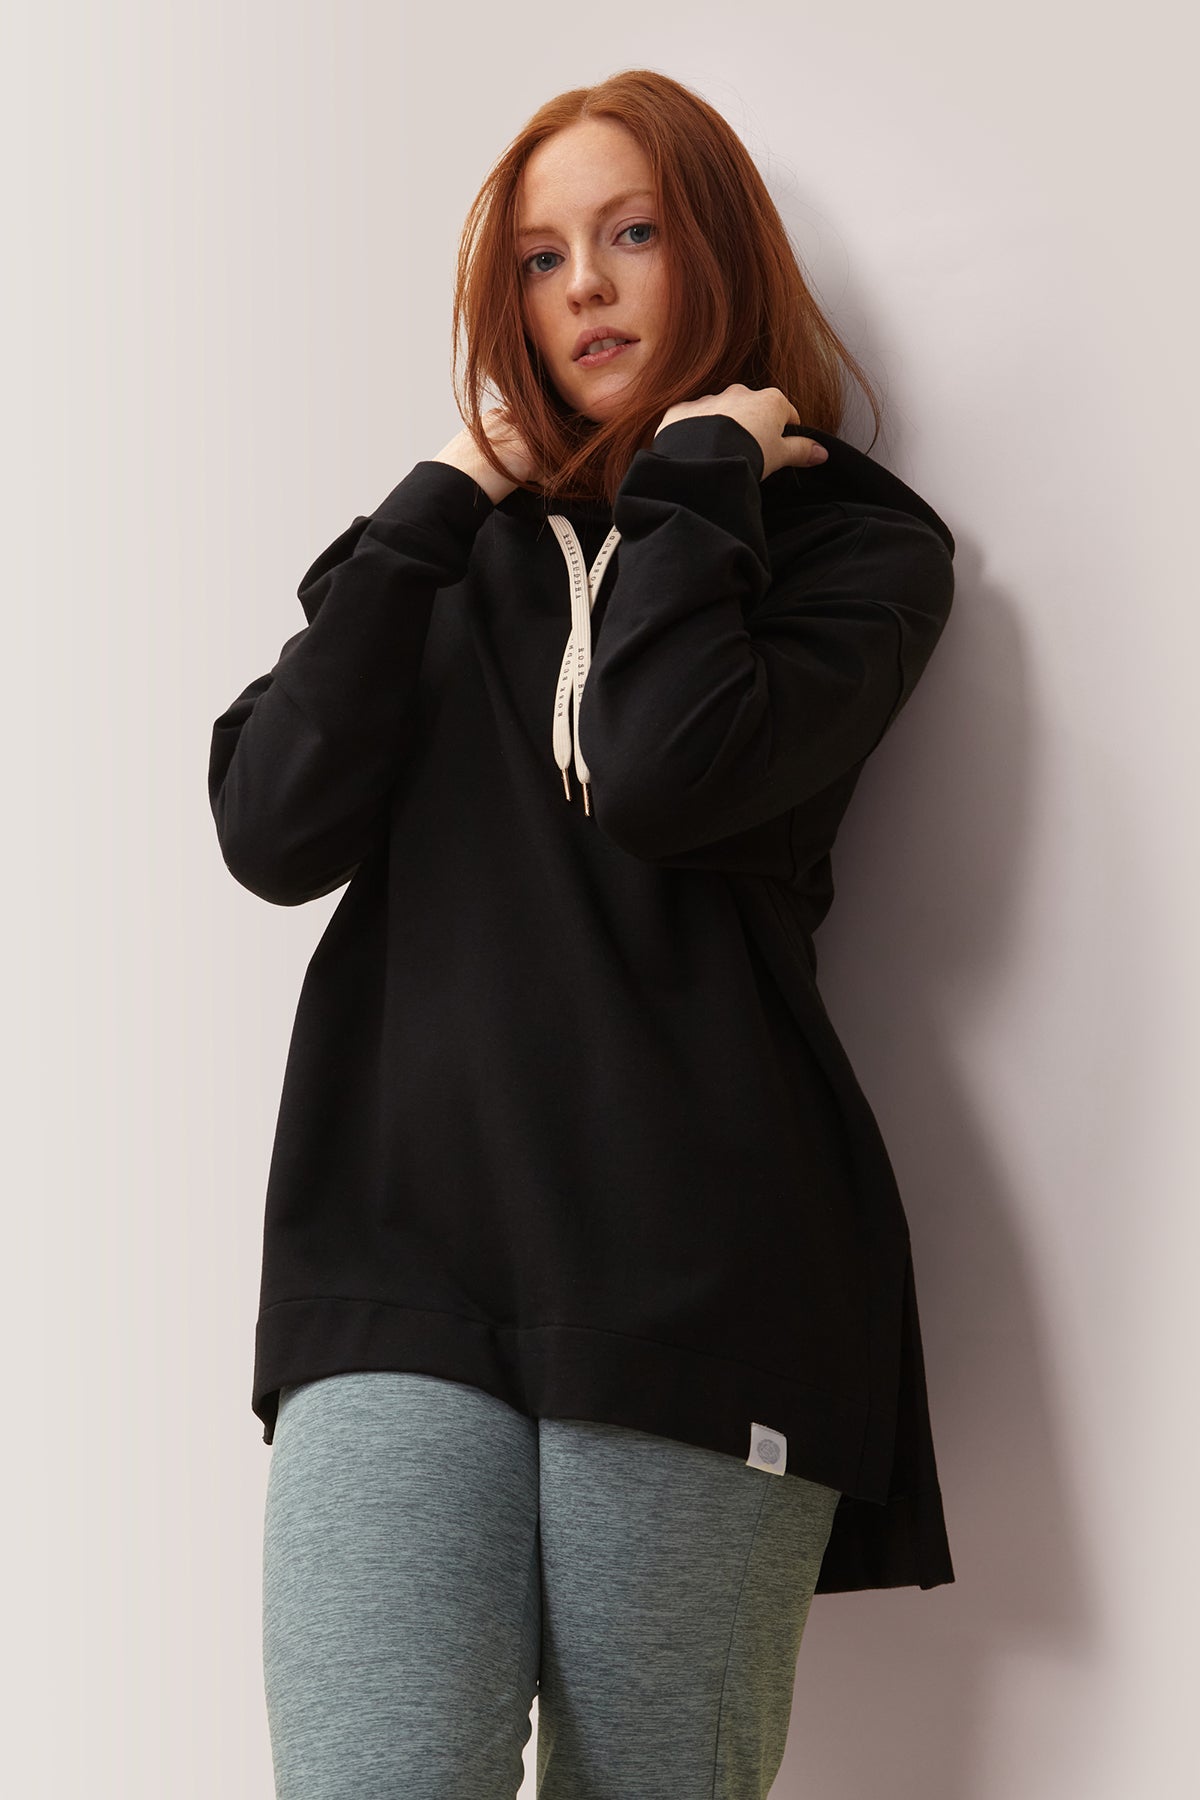 Femme qui porte le chandail Chill out de Rose Boreal./ Women wearing the Chill Out Hoodie by Rose Boreal. -Total Eclipse